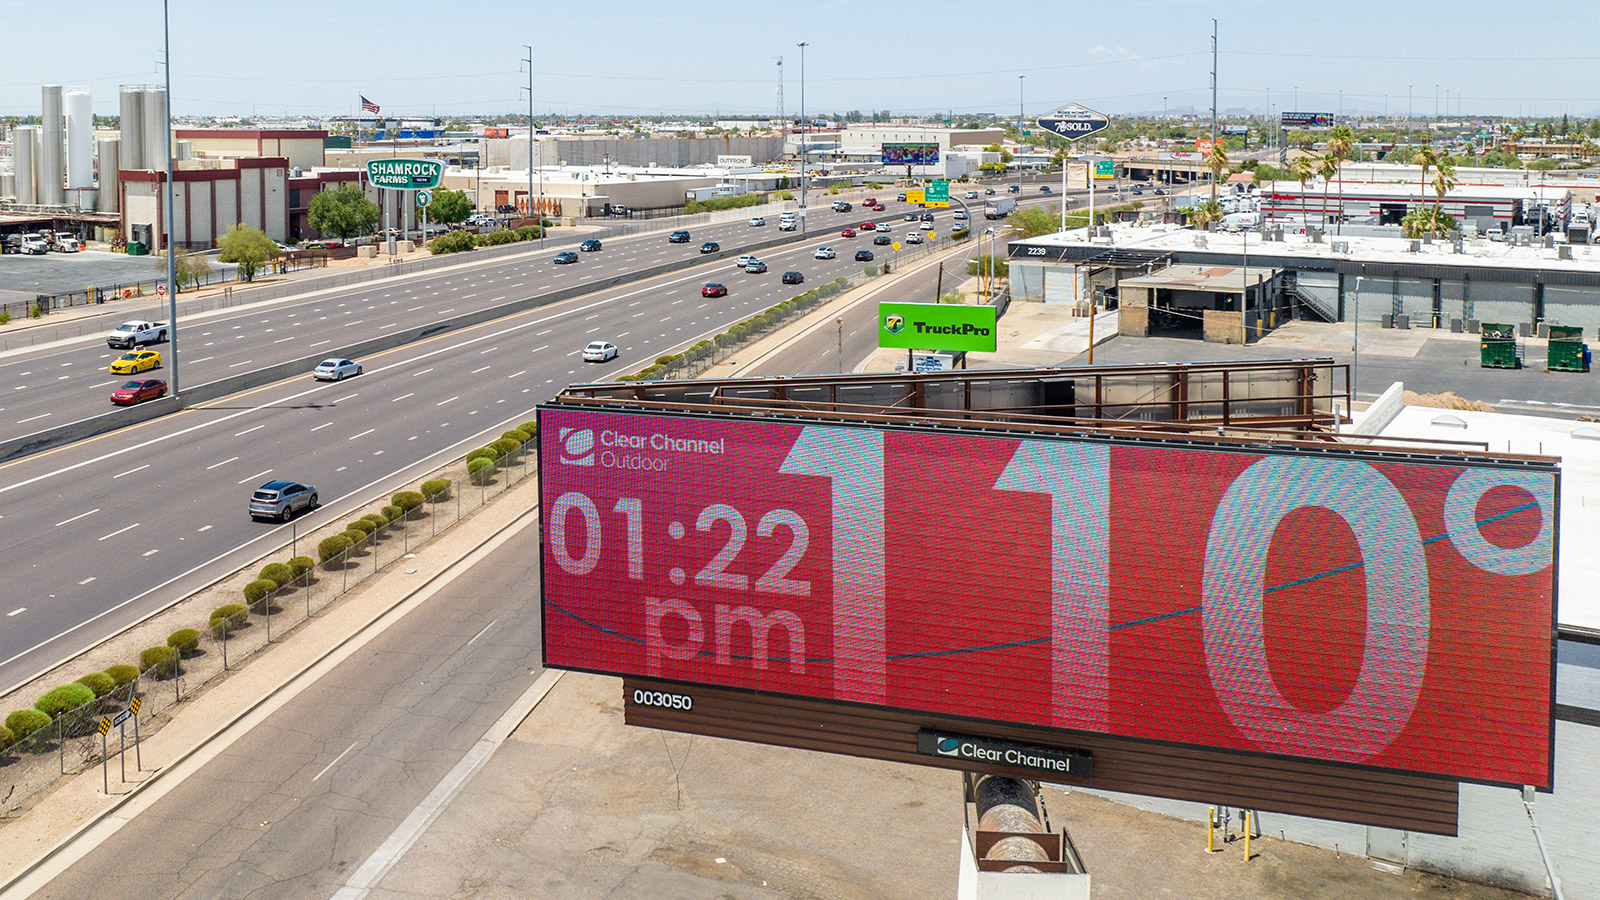 <p><br />
PHOENIX, ARIZONA - JULY 16: In an aerial view, a billboard displays the temperature that was forecast to reach 115 degrees Fahrenheit on July 16, 2023 in Phoenix, Arizona. A persistent heat dome over Texas that has expanded to California, Nevada and Arizona is subjecting millions of Americans to excessive heat warnings, according to the National Weather Service. (Photo by&nbsp;</p>